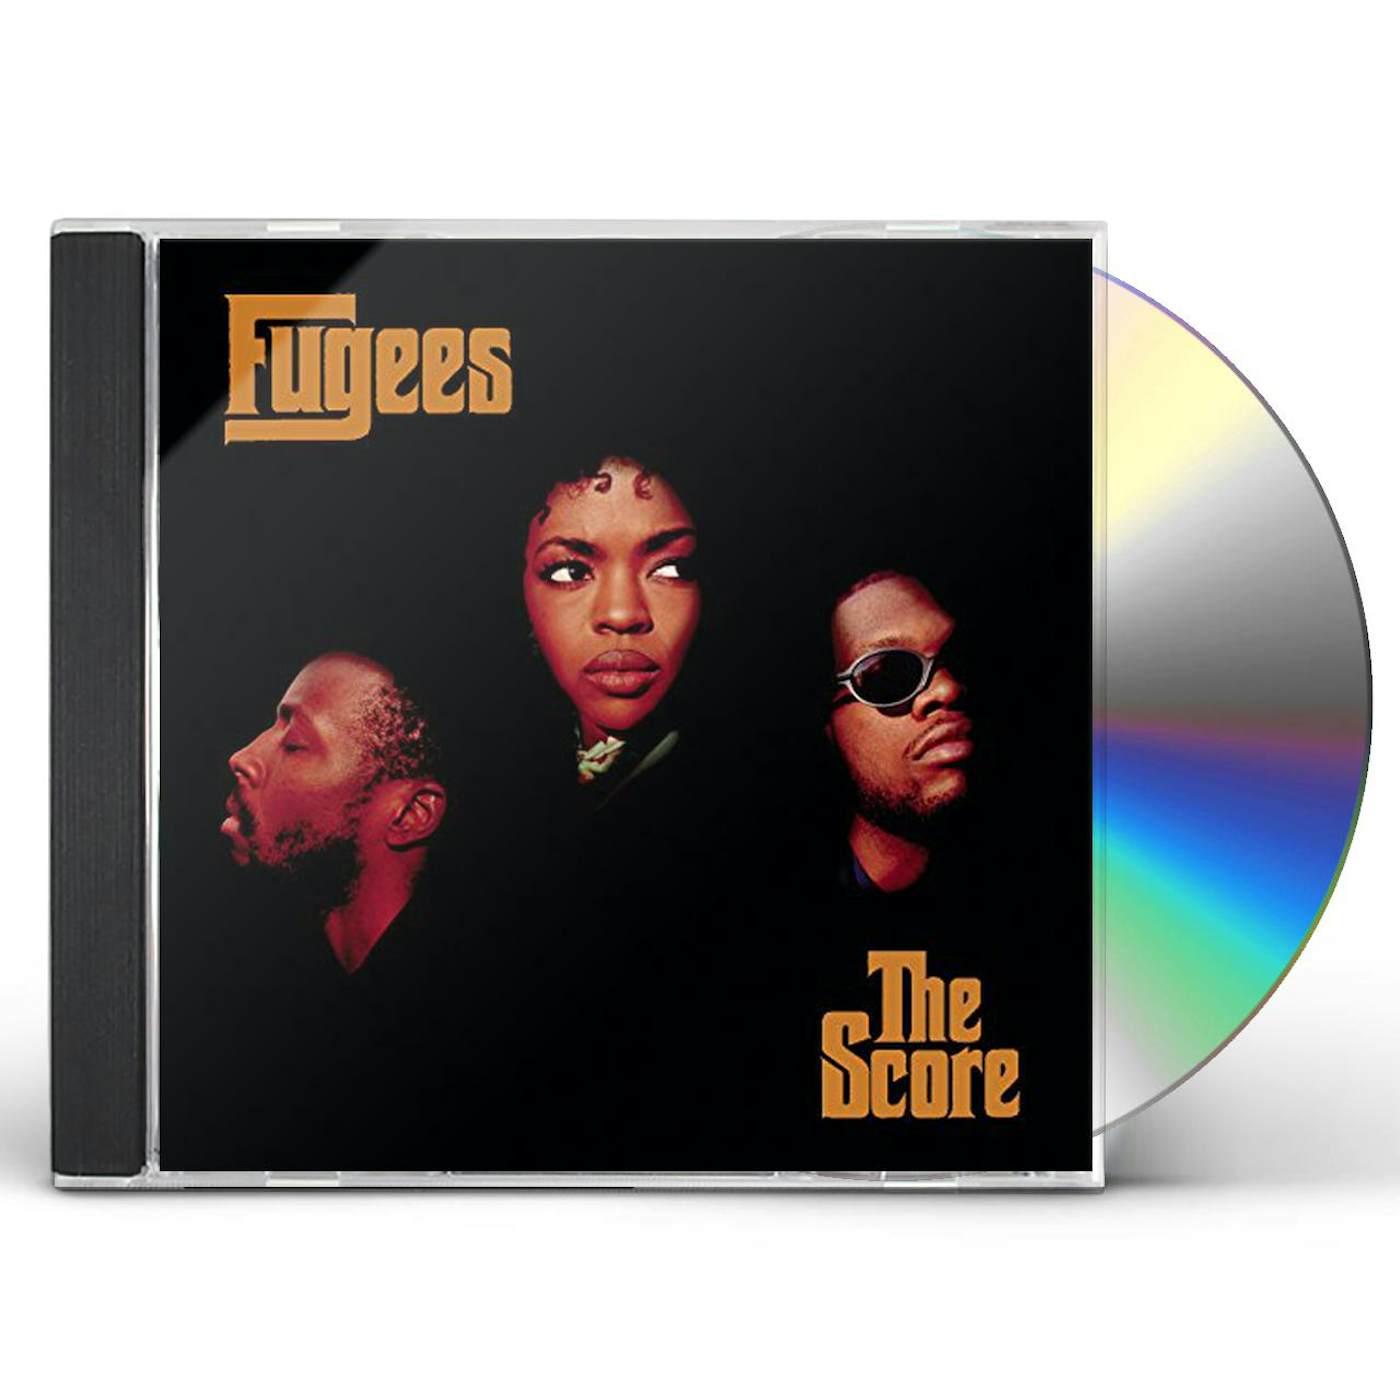 Fugees SCORE (GOLD SERIES) CD